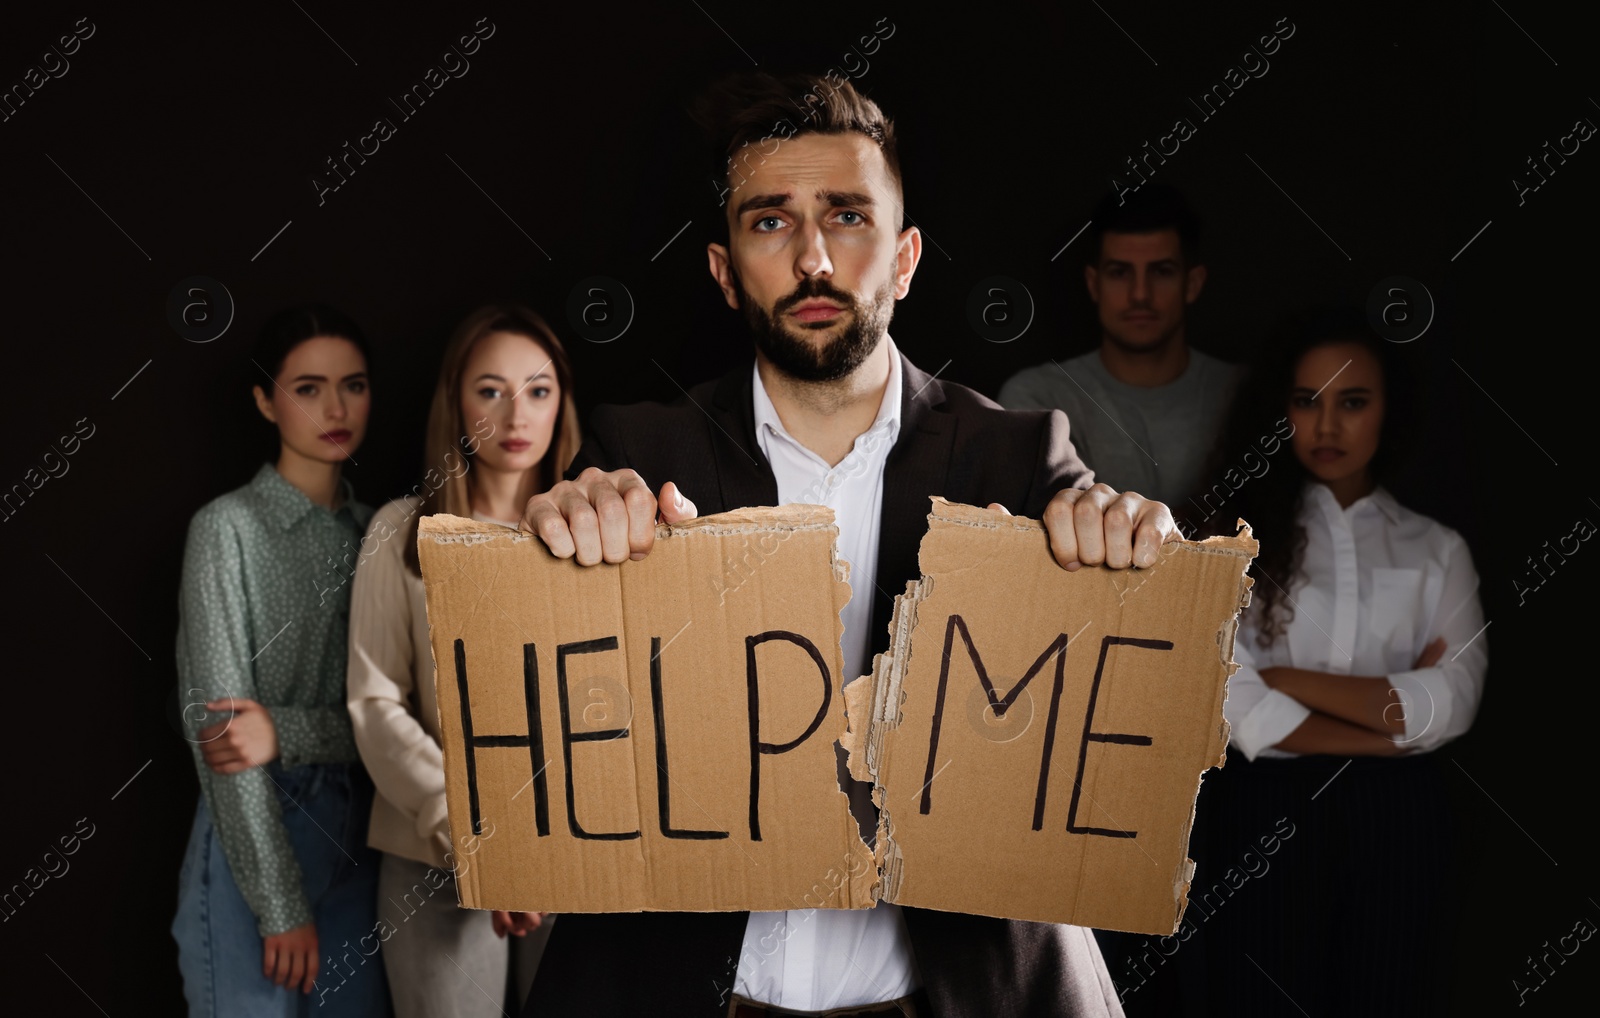 Photo of Unhappy man with HELP ME sign and group of people behind his back on dark background